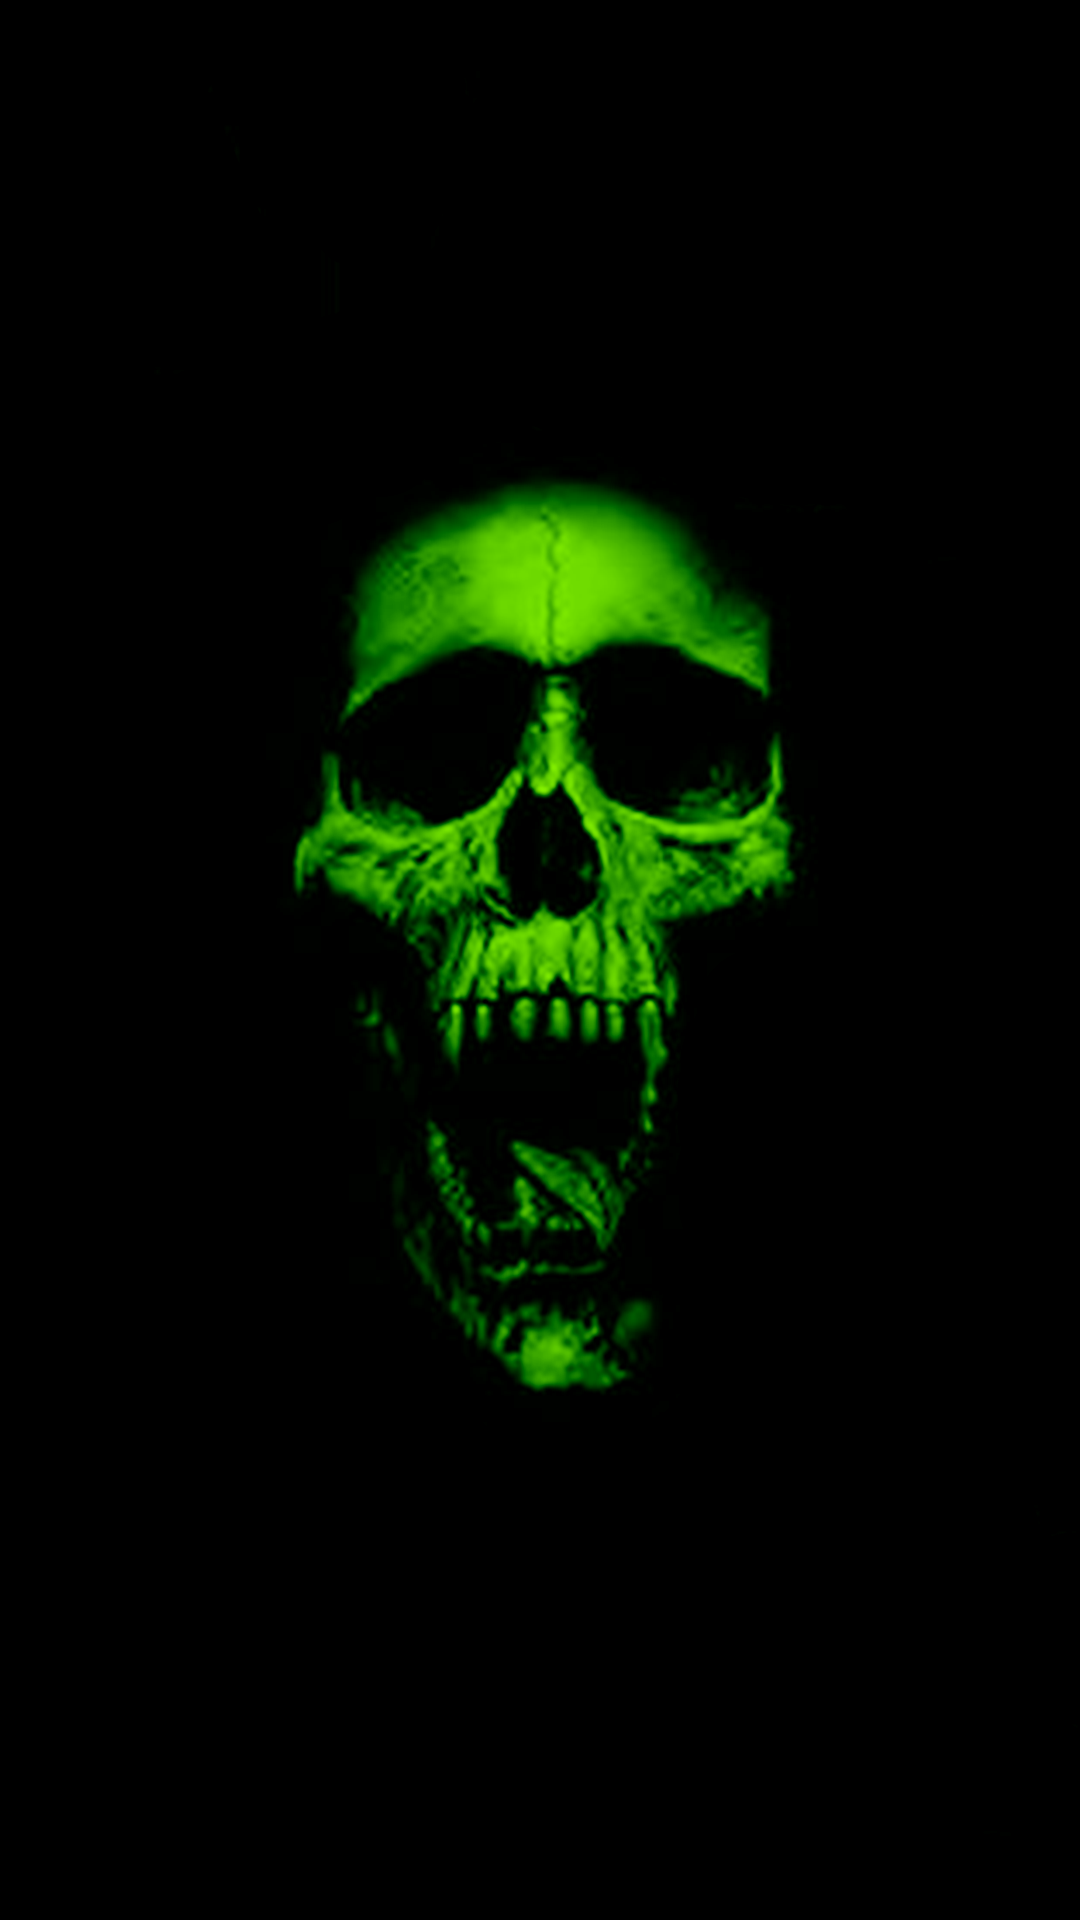 Download Our HD Green Skull Wallpaper For Android Phones .0123